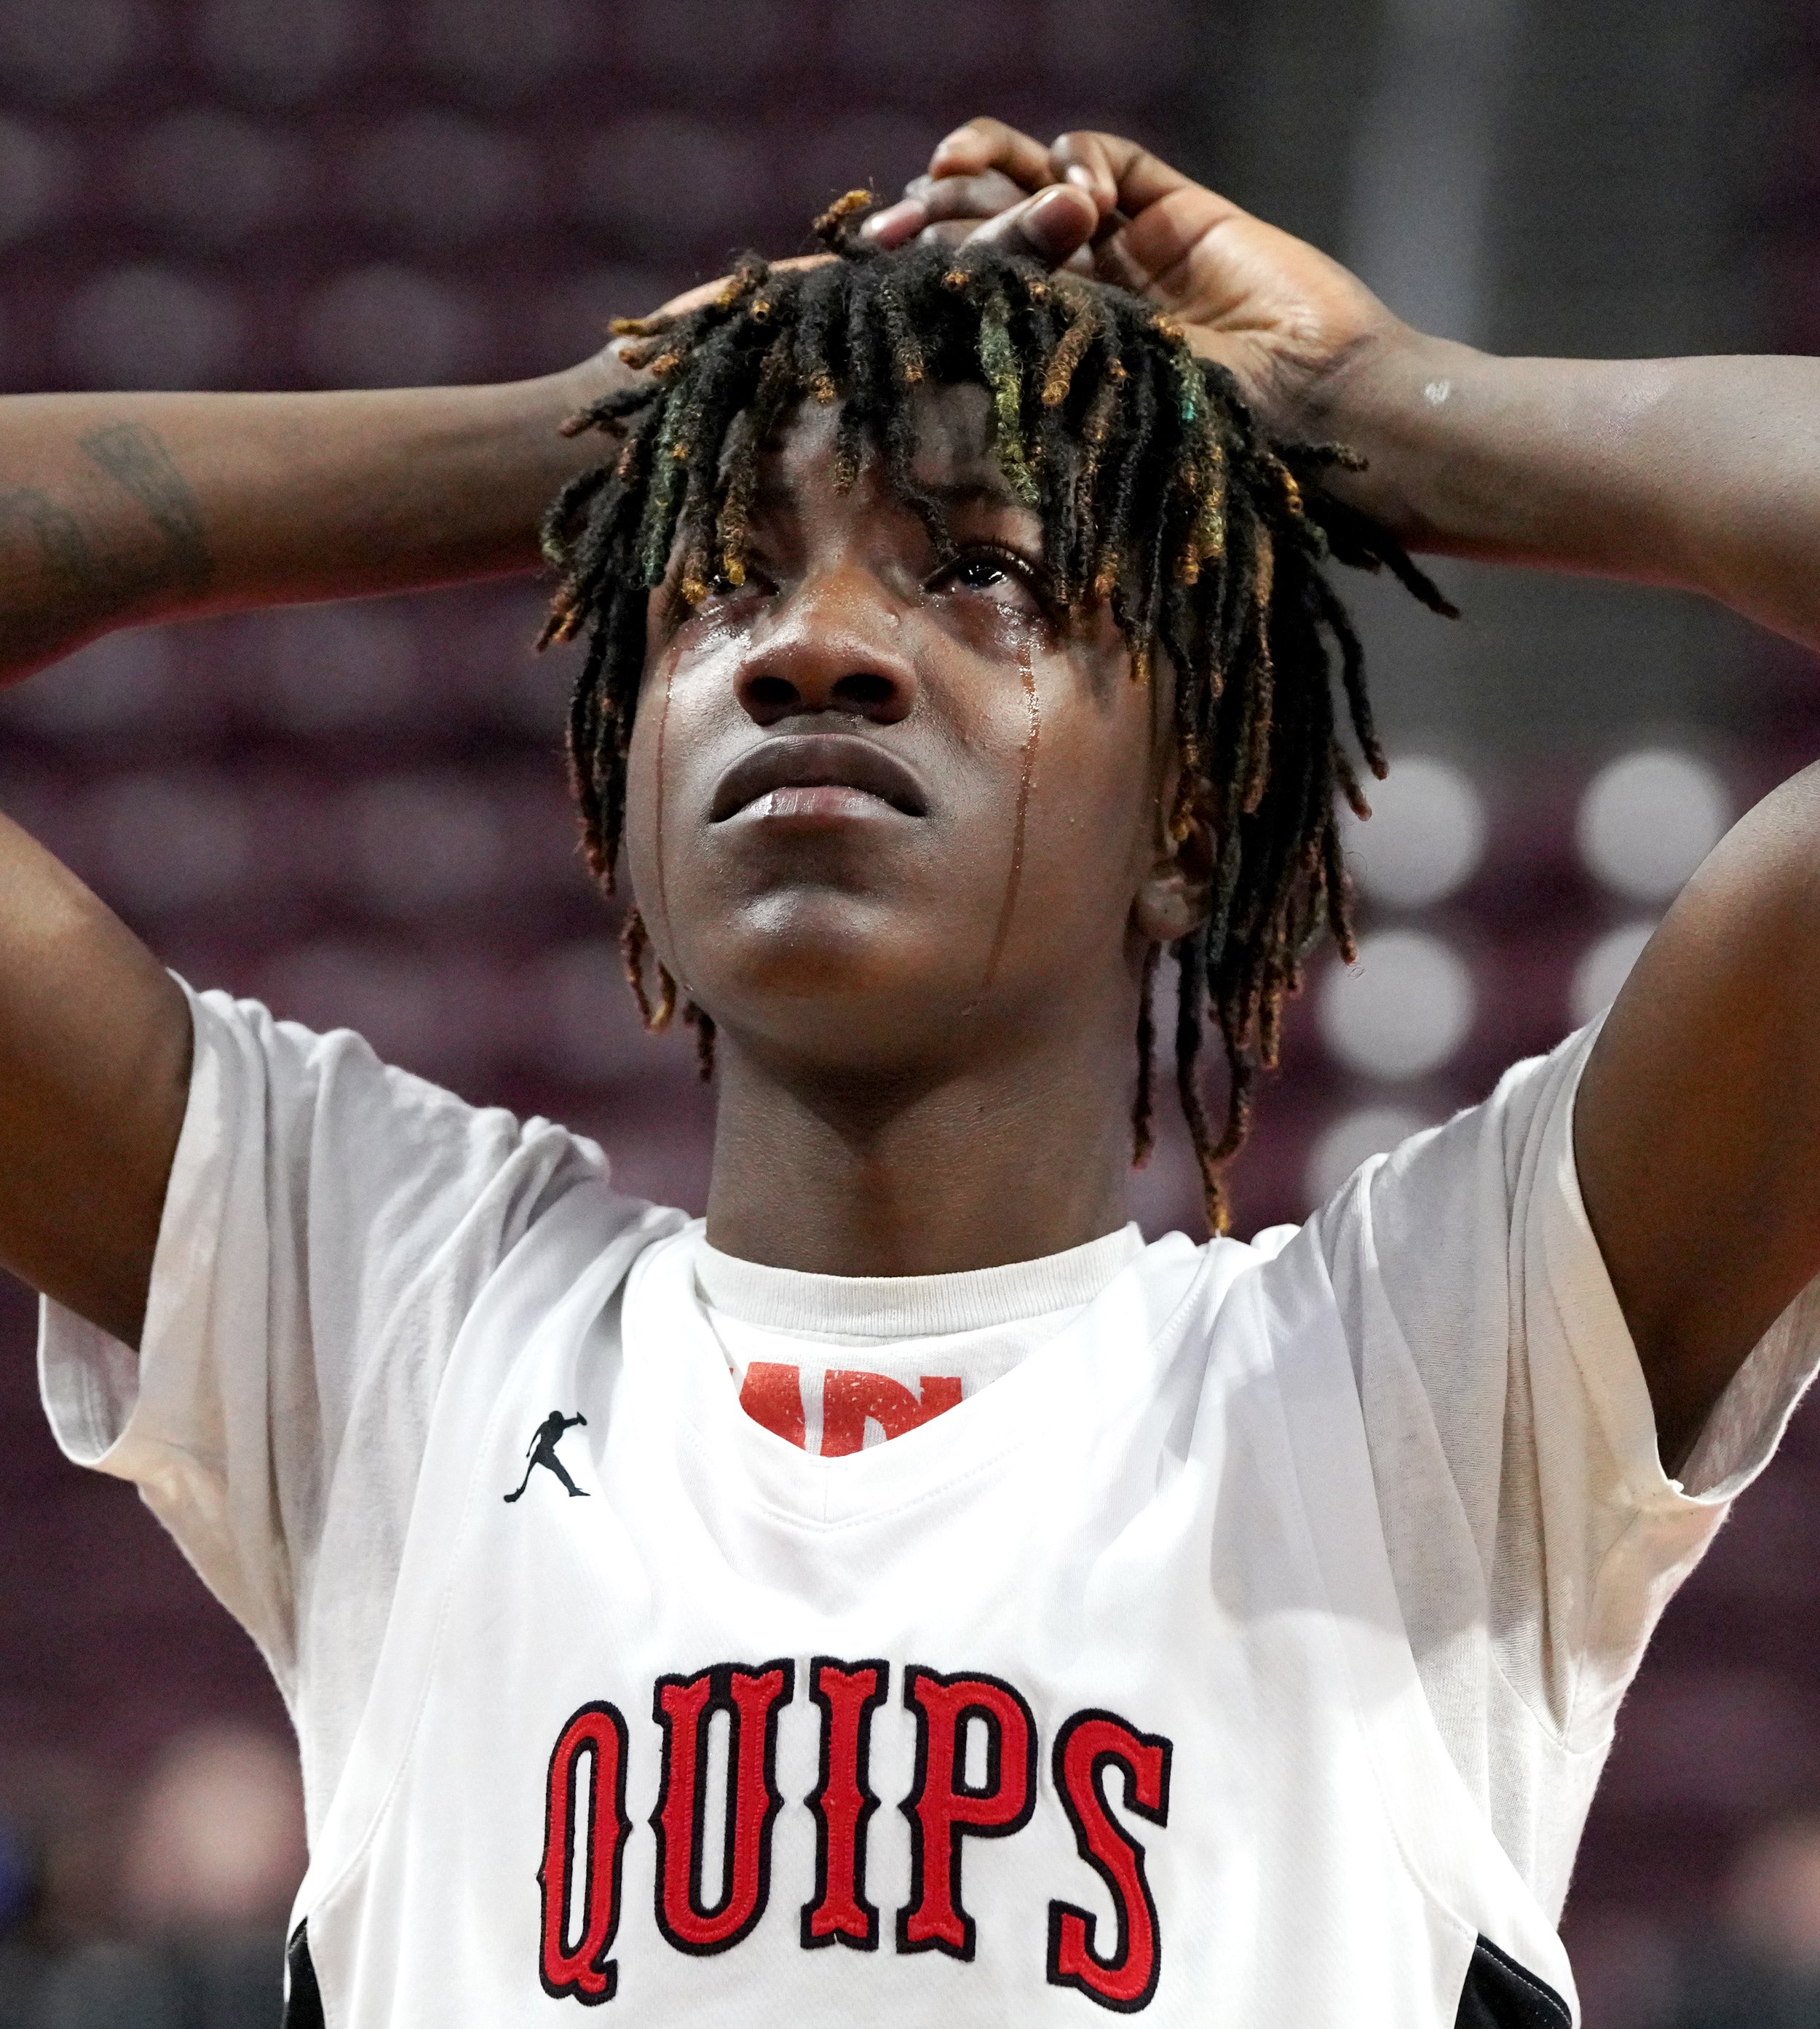  Aliquippa’s Damar Freeman reacts after his team's 76-58 loss against Devon Prep in the PIAA class 3A boys basketball championship on Saturday, March 26, 2022, at Giant Center in Hershey, Pa. (Emily Matthews/Post-Gazette)  